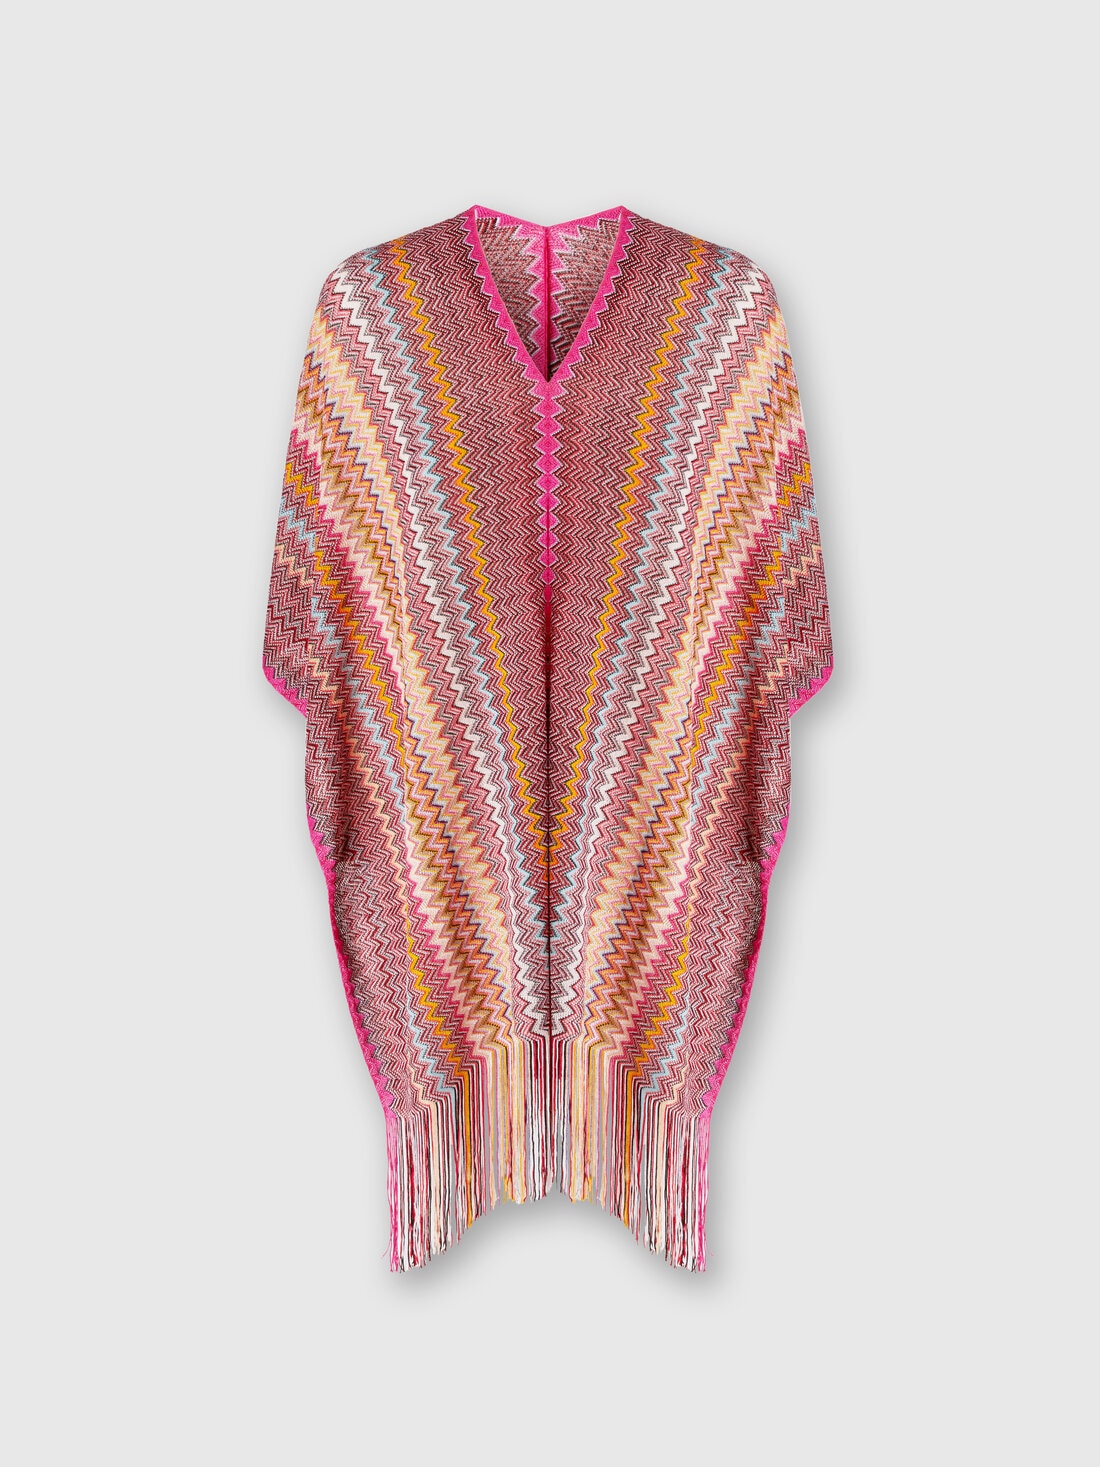 Poncho in zigzag viscose knit with fringes, Multicoloured  - 8053147141220 - 0